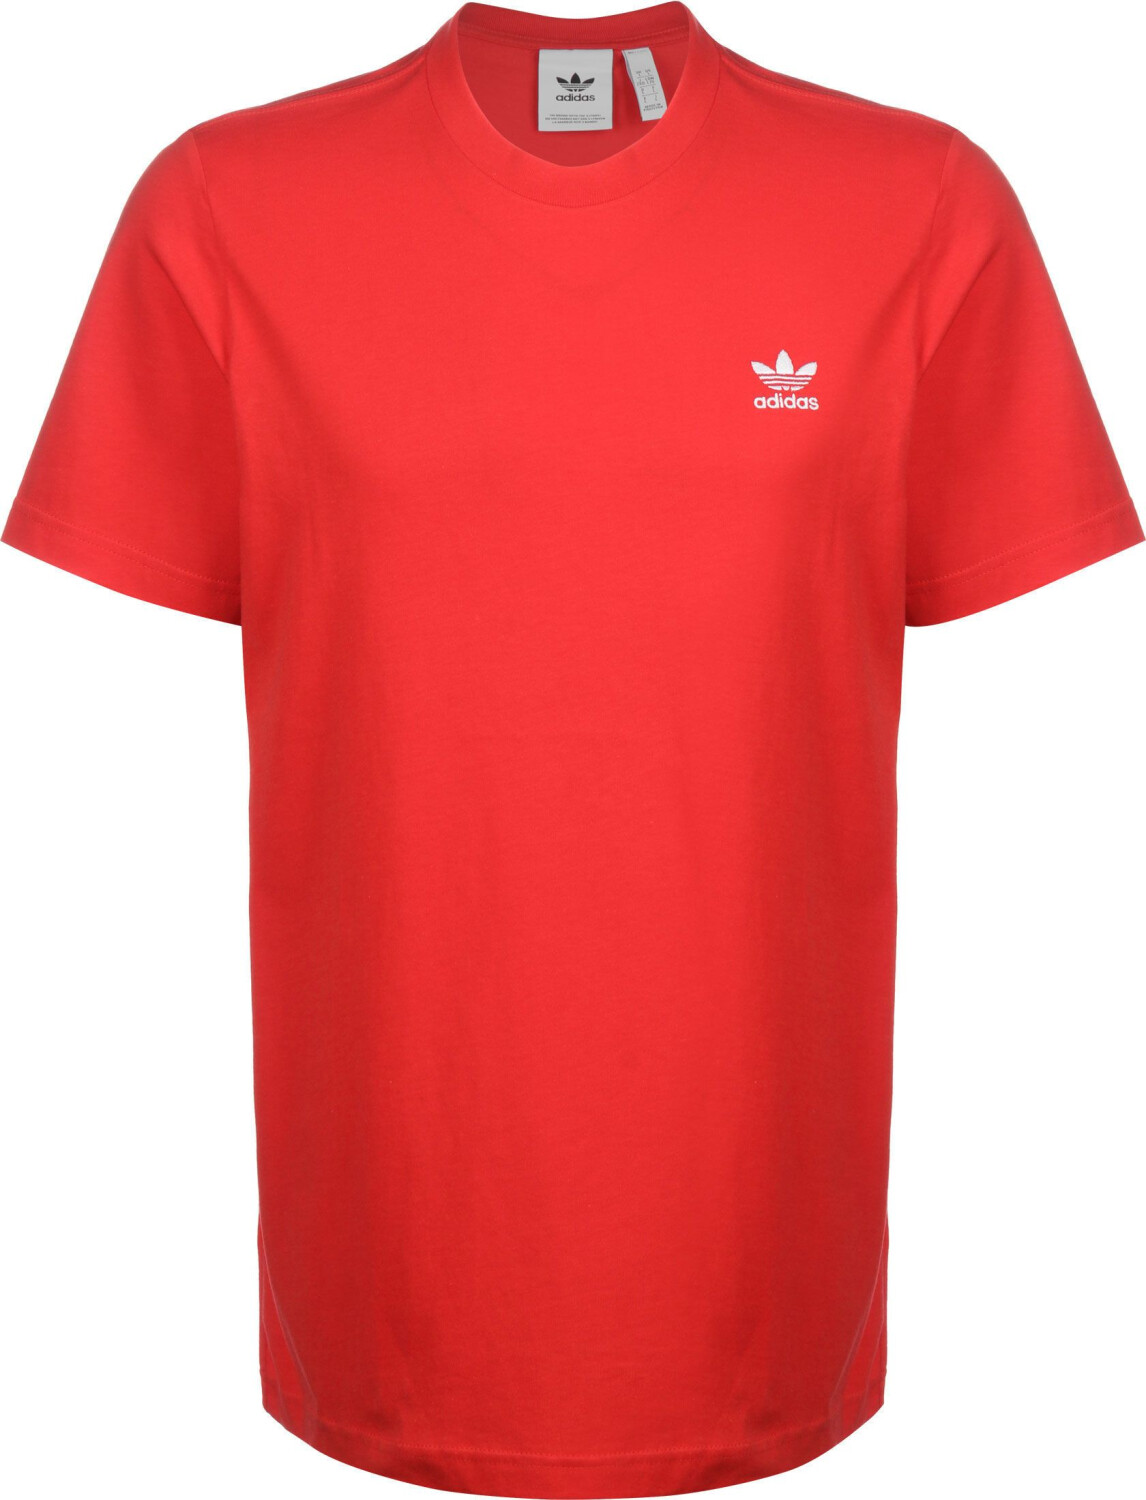 Essentials Best £9.99 Deals Buy on Trefoil from – T-Shirt (Today) Adidas